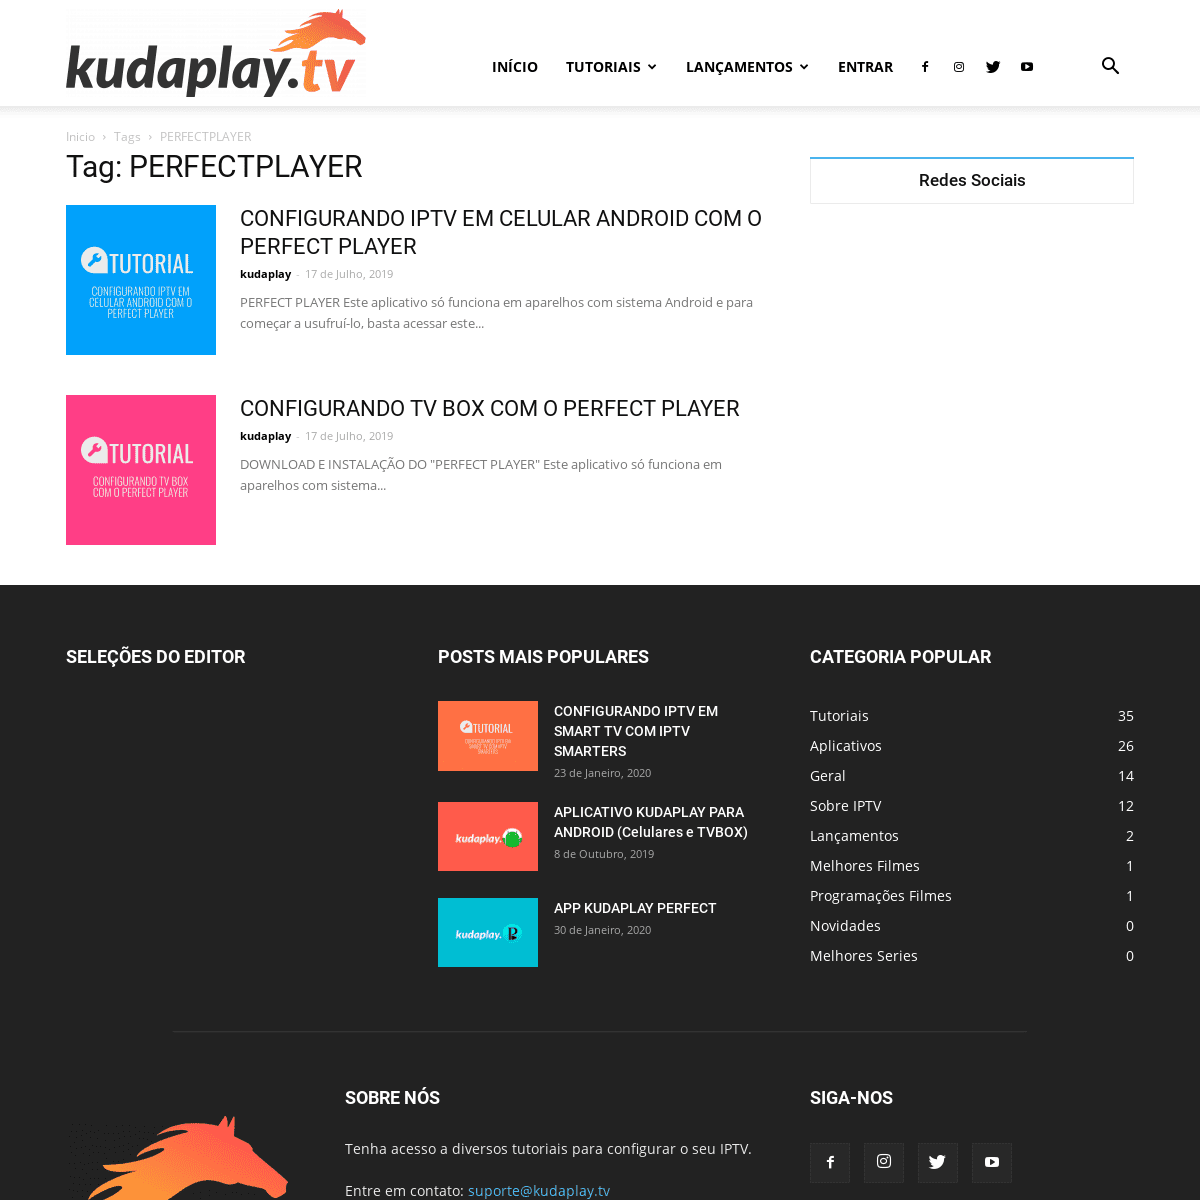 A complete backup of http://kudaplay.tv/blog/tag/perfectplayer/